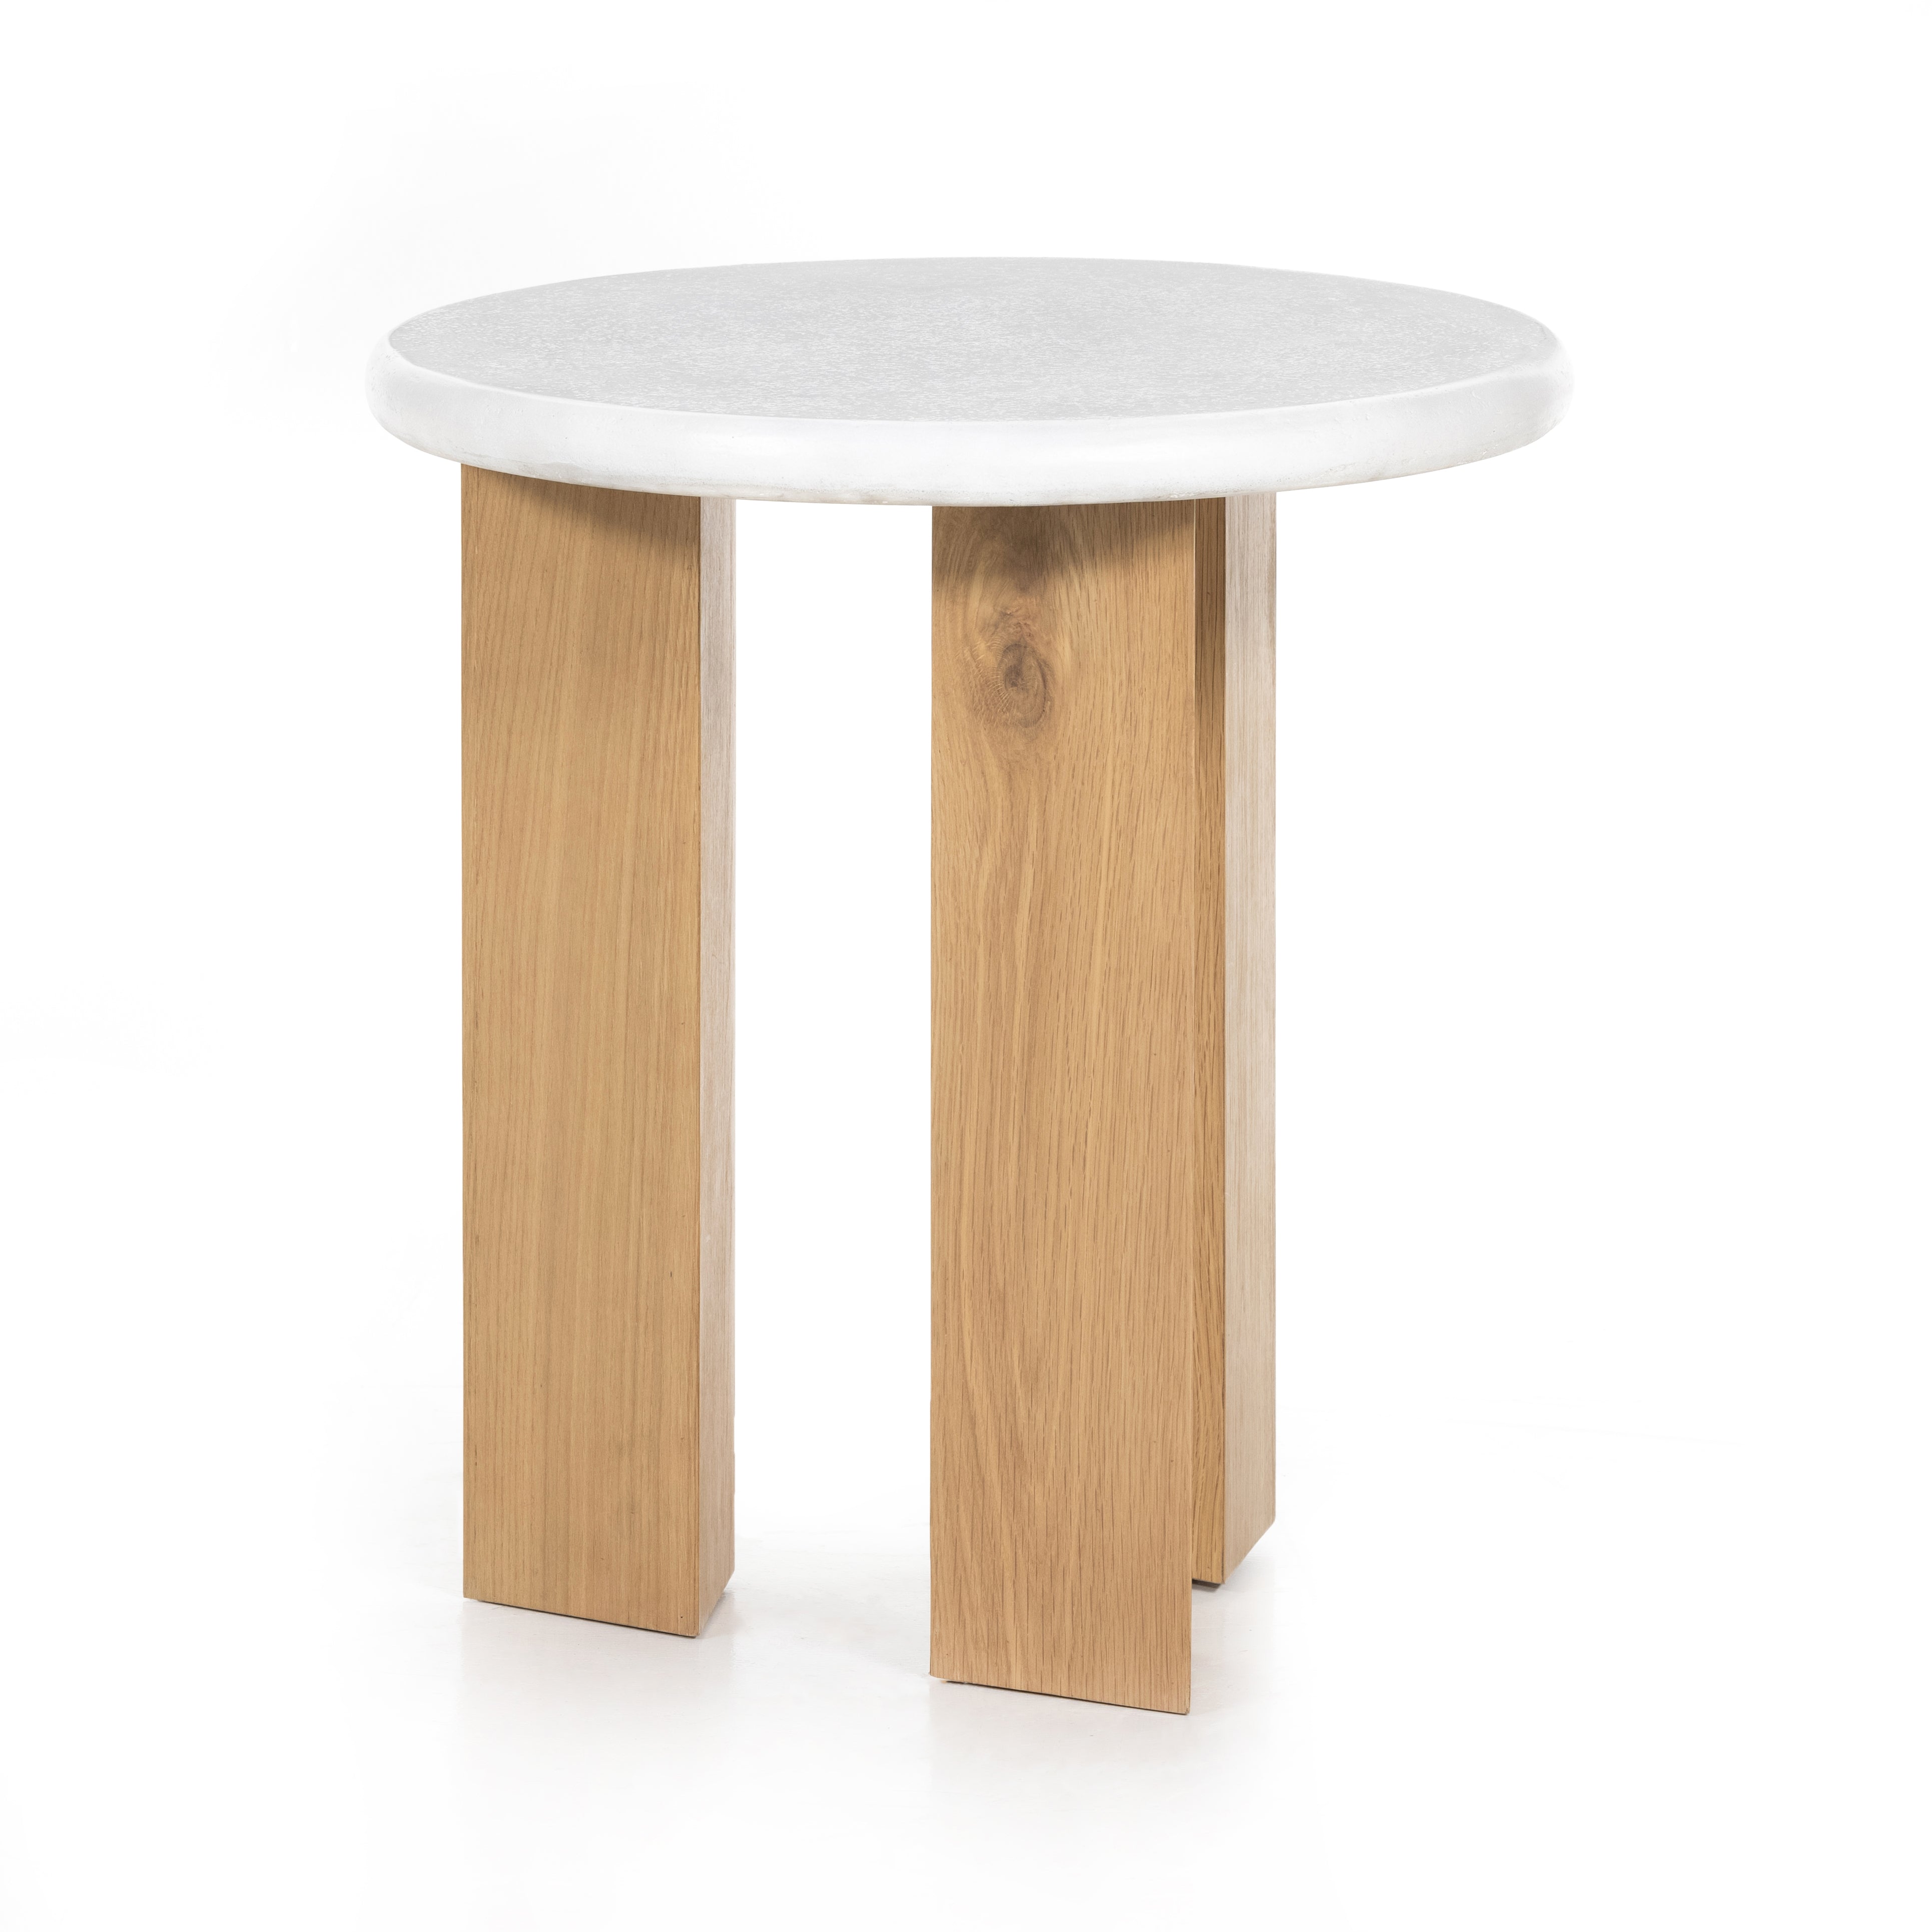 This Odin Nightstand - Stucco White is crisp, clean and beautifully simple. Light-finished oak forms a three-leg frame for a rounded tabletop of white-finished faux concrete.  Overall Dimensions: 22.00"w x 22.00"d x 24.00"h